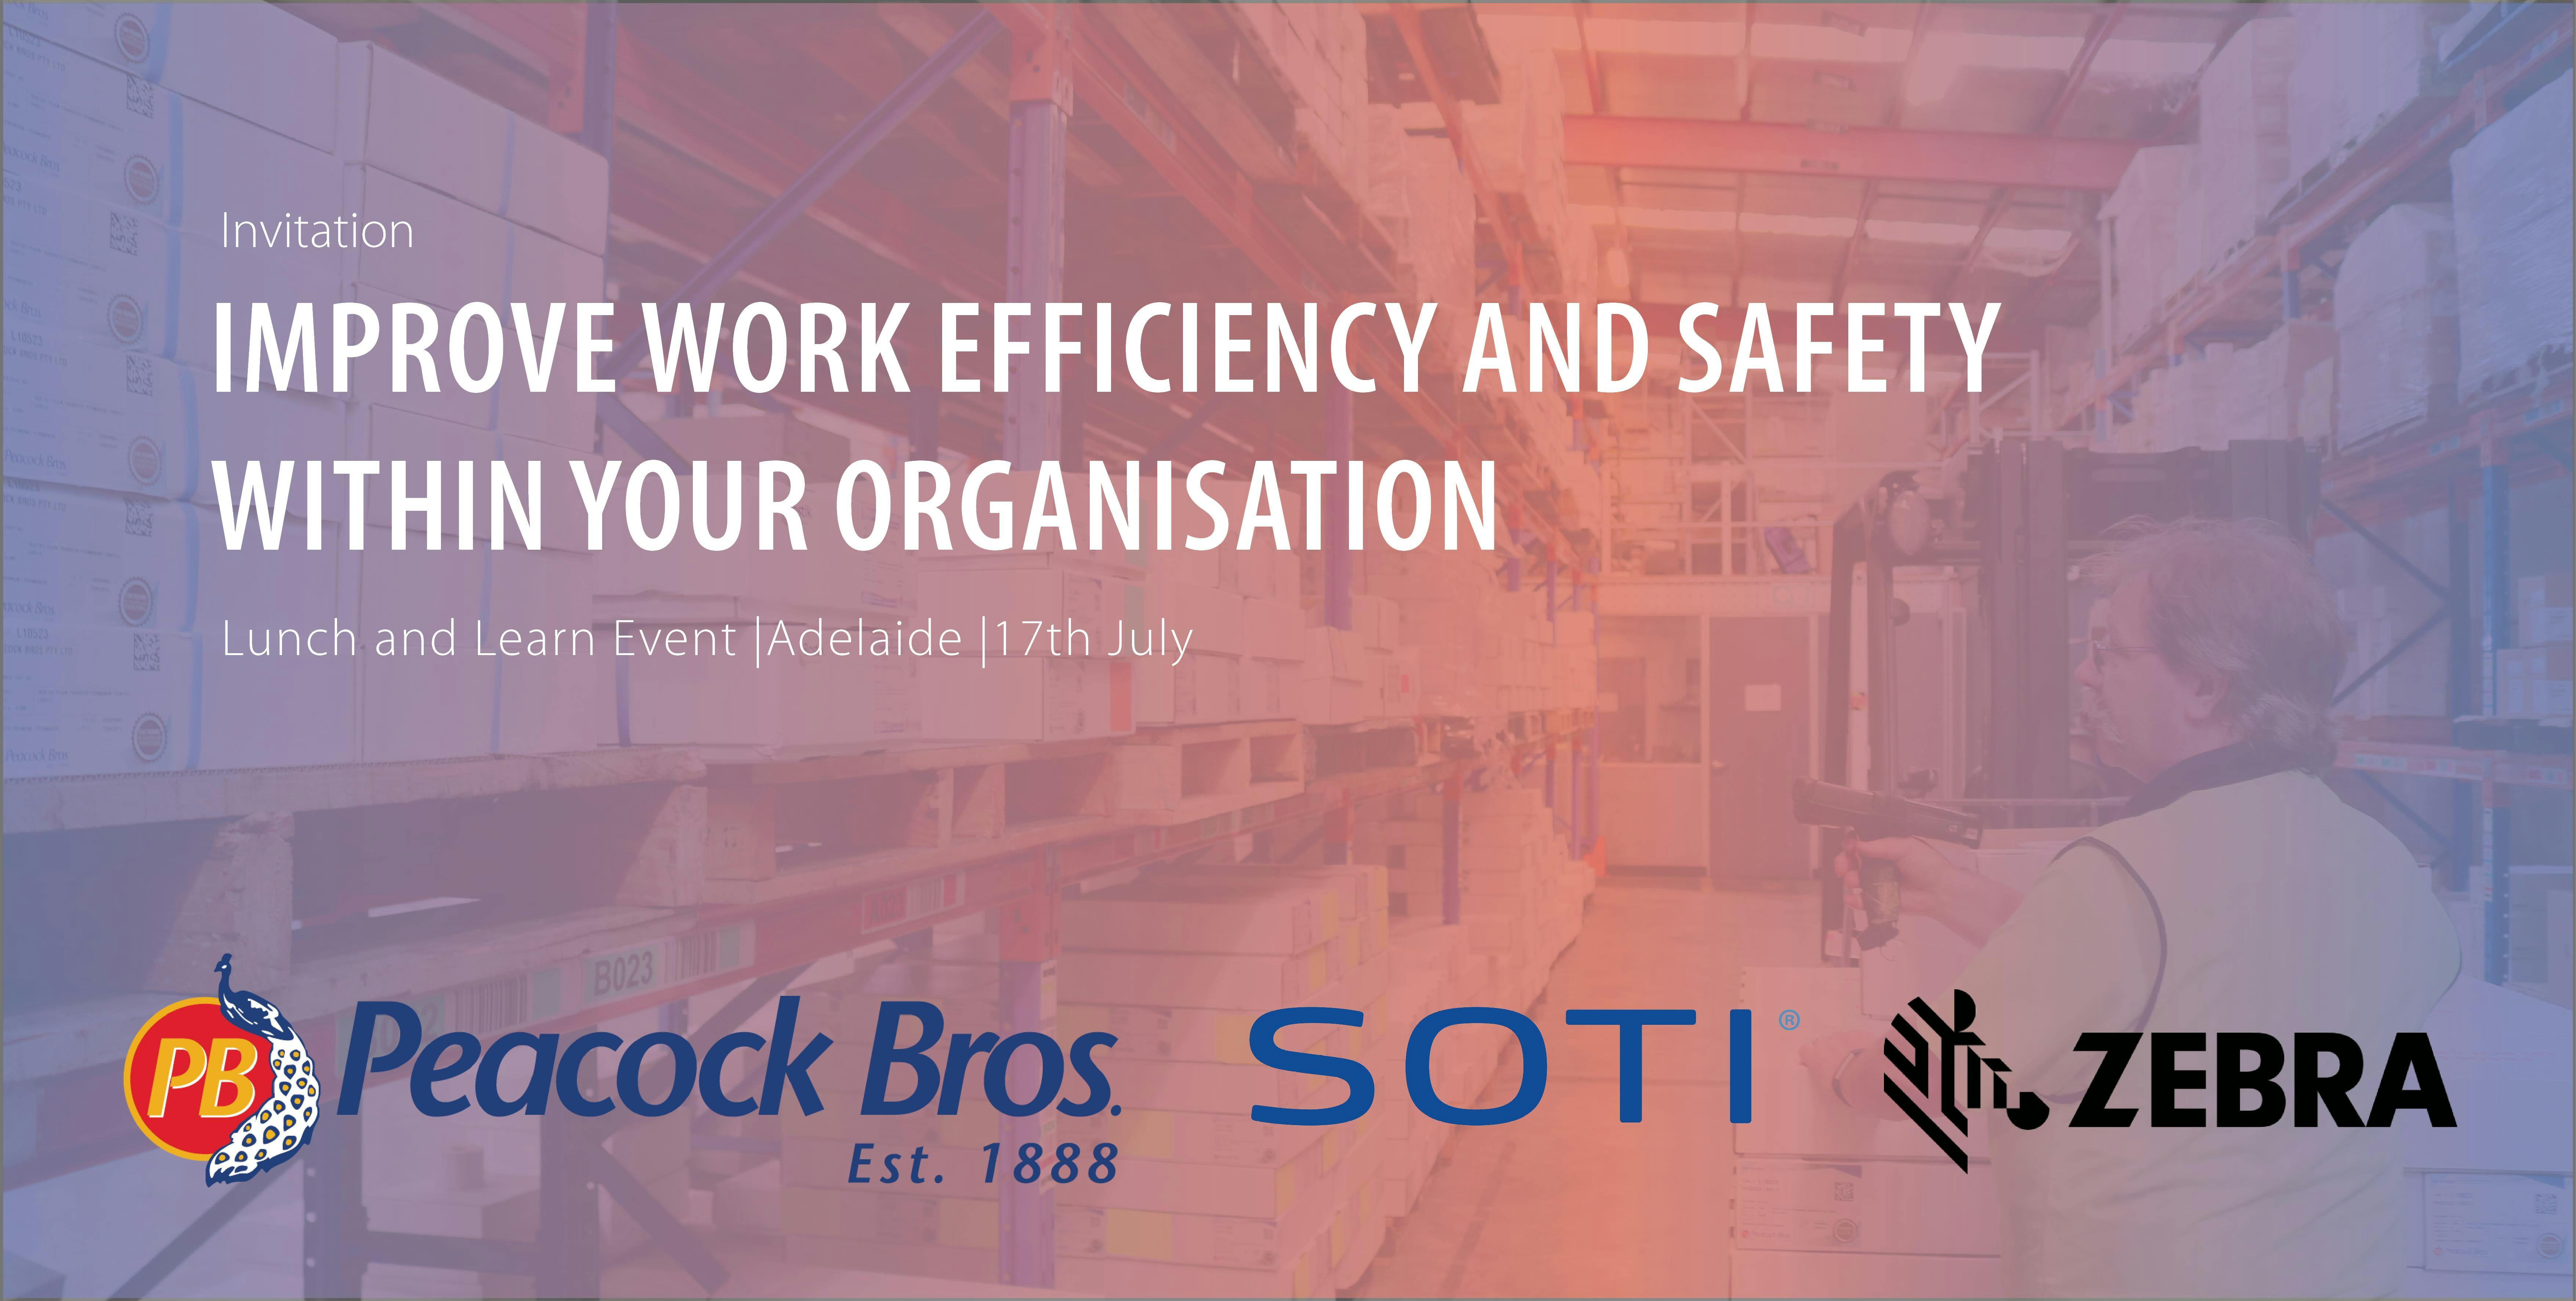 Improve Work Efficiency and Safety within your Organisation. Event presented by Peacock Bros., SOTI Inc. and Zebra Technologies